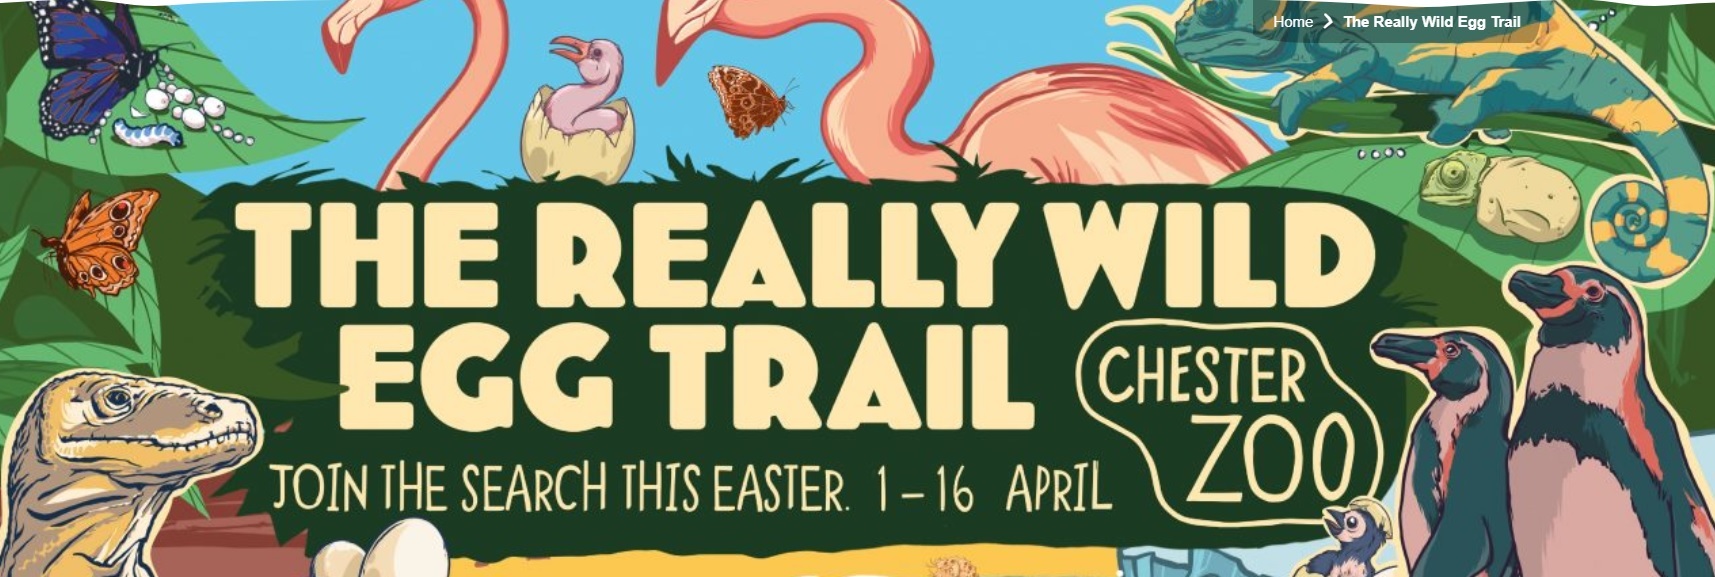 The really wild egg trail (Image Chester Zoo)